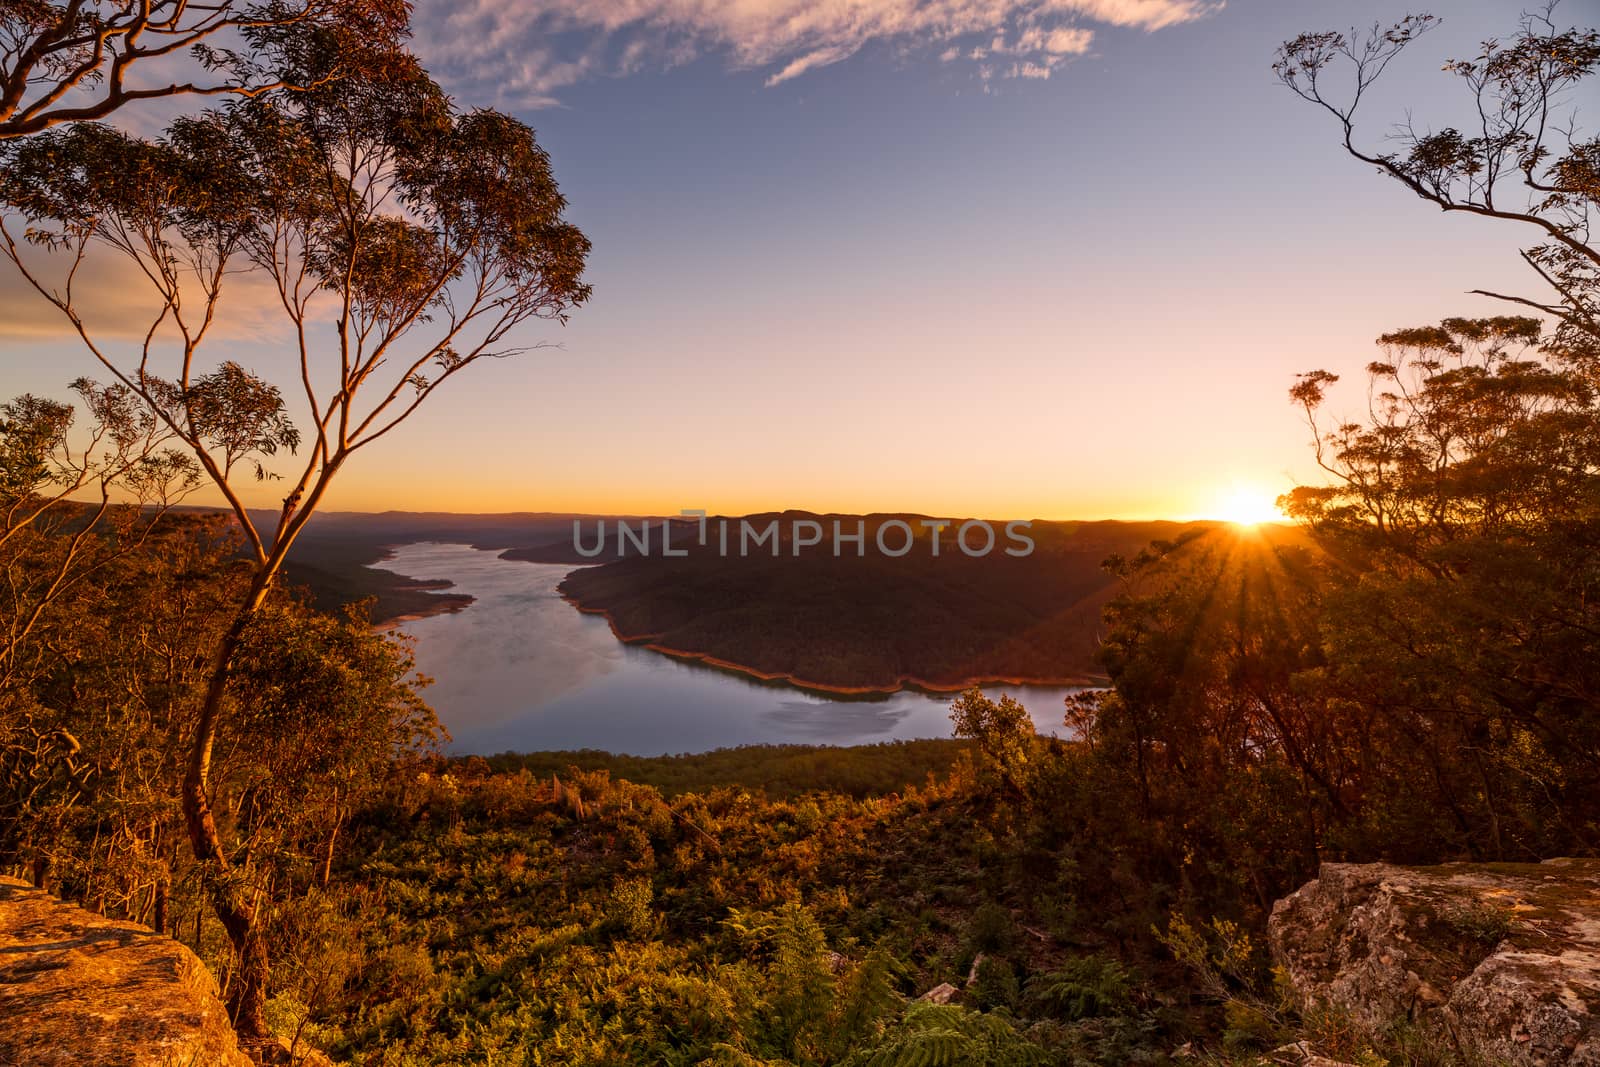 Sunset scenic vista from Nattai with Burragorang Lake in view. Rocky escarpment with large gum trees in the foreground as the sun sets on the horizon casting its last golden rays onto the landscape.